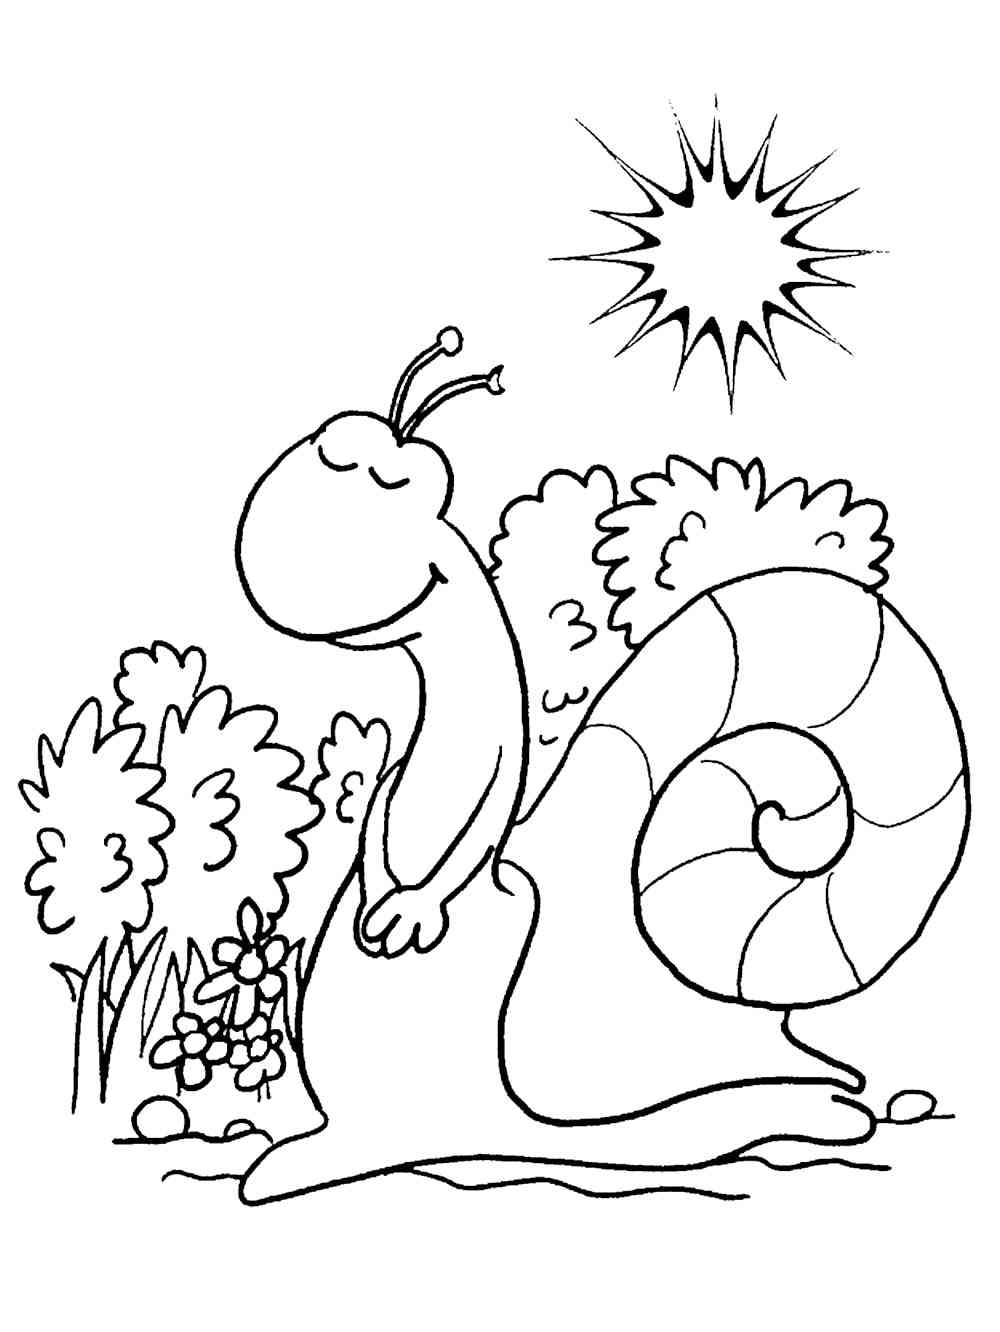 Snail in the Forest coloring page